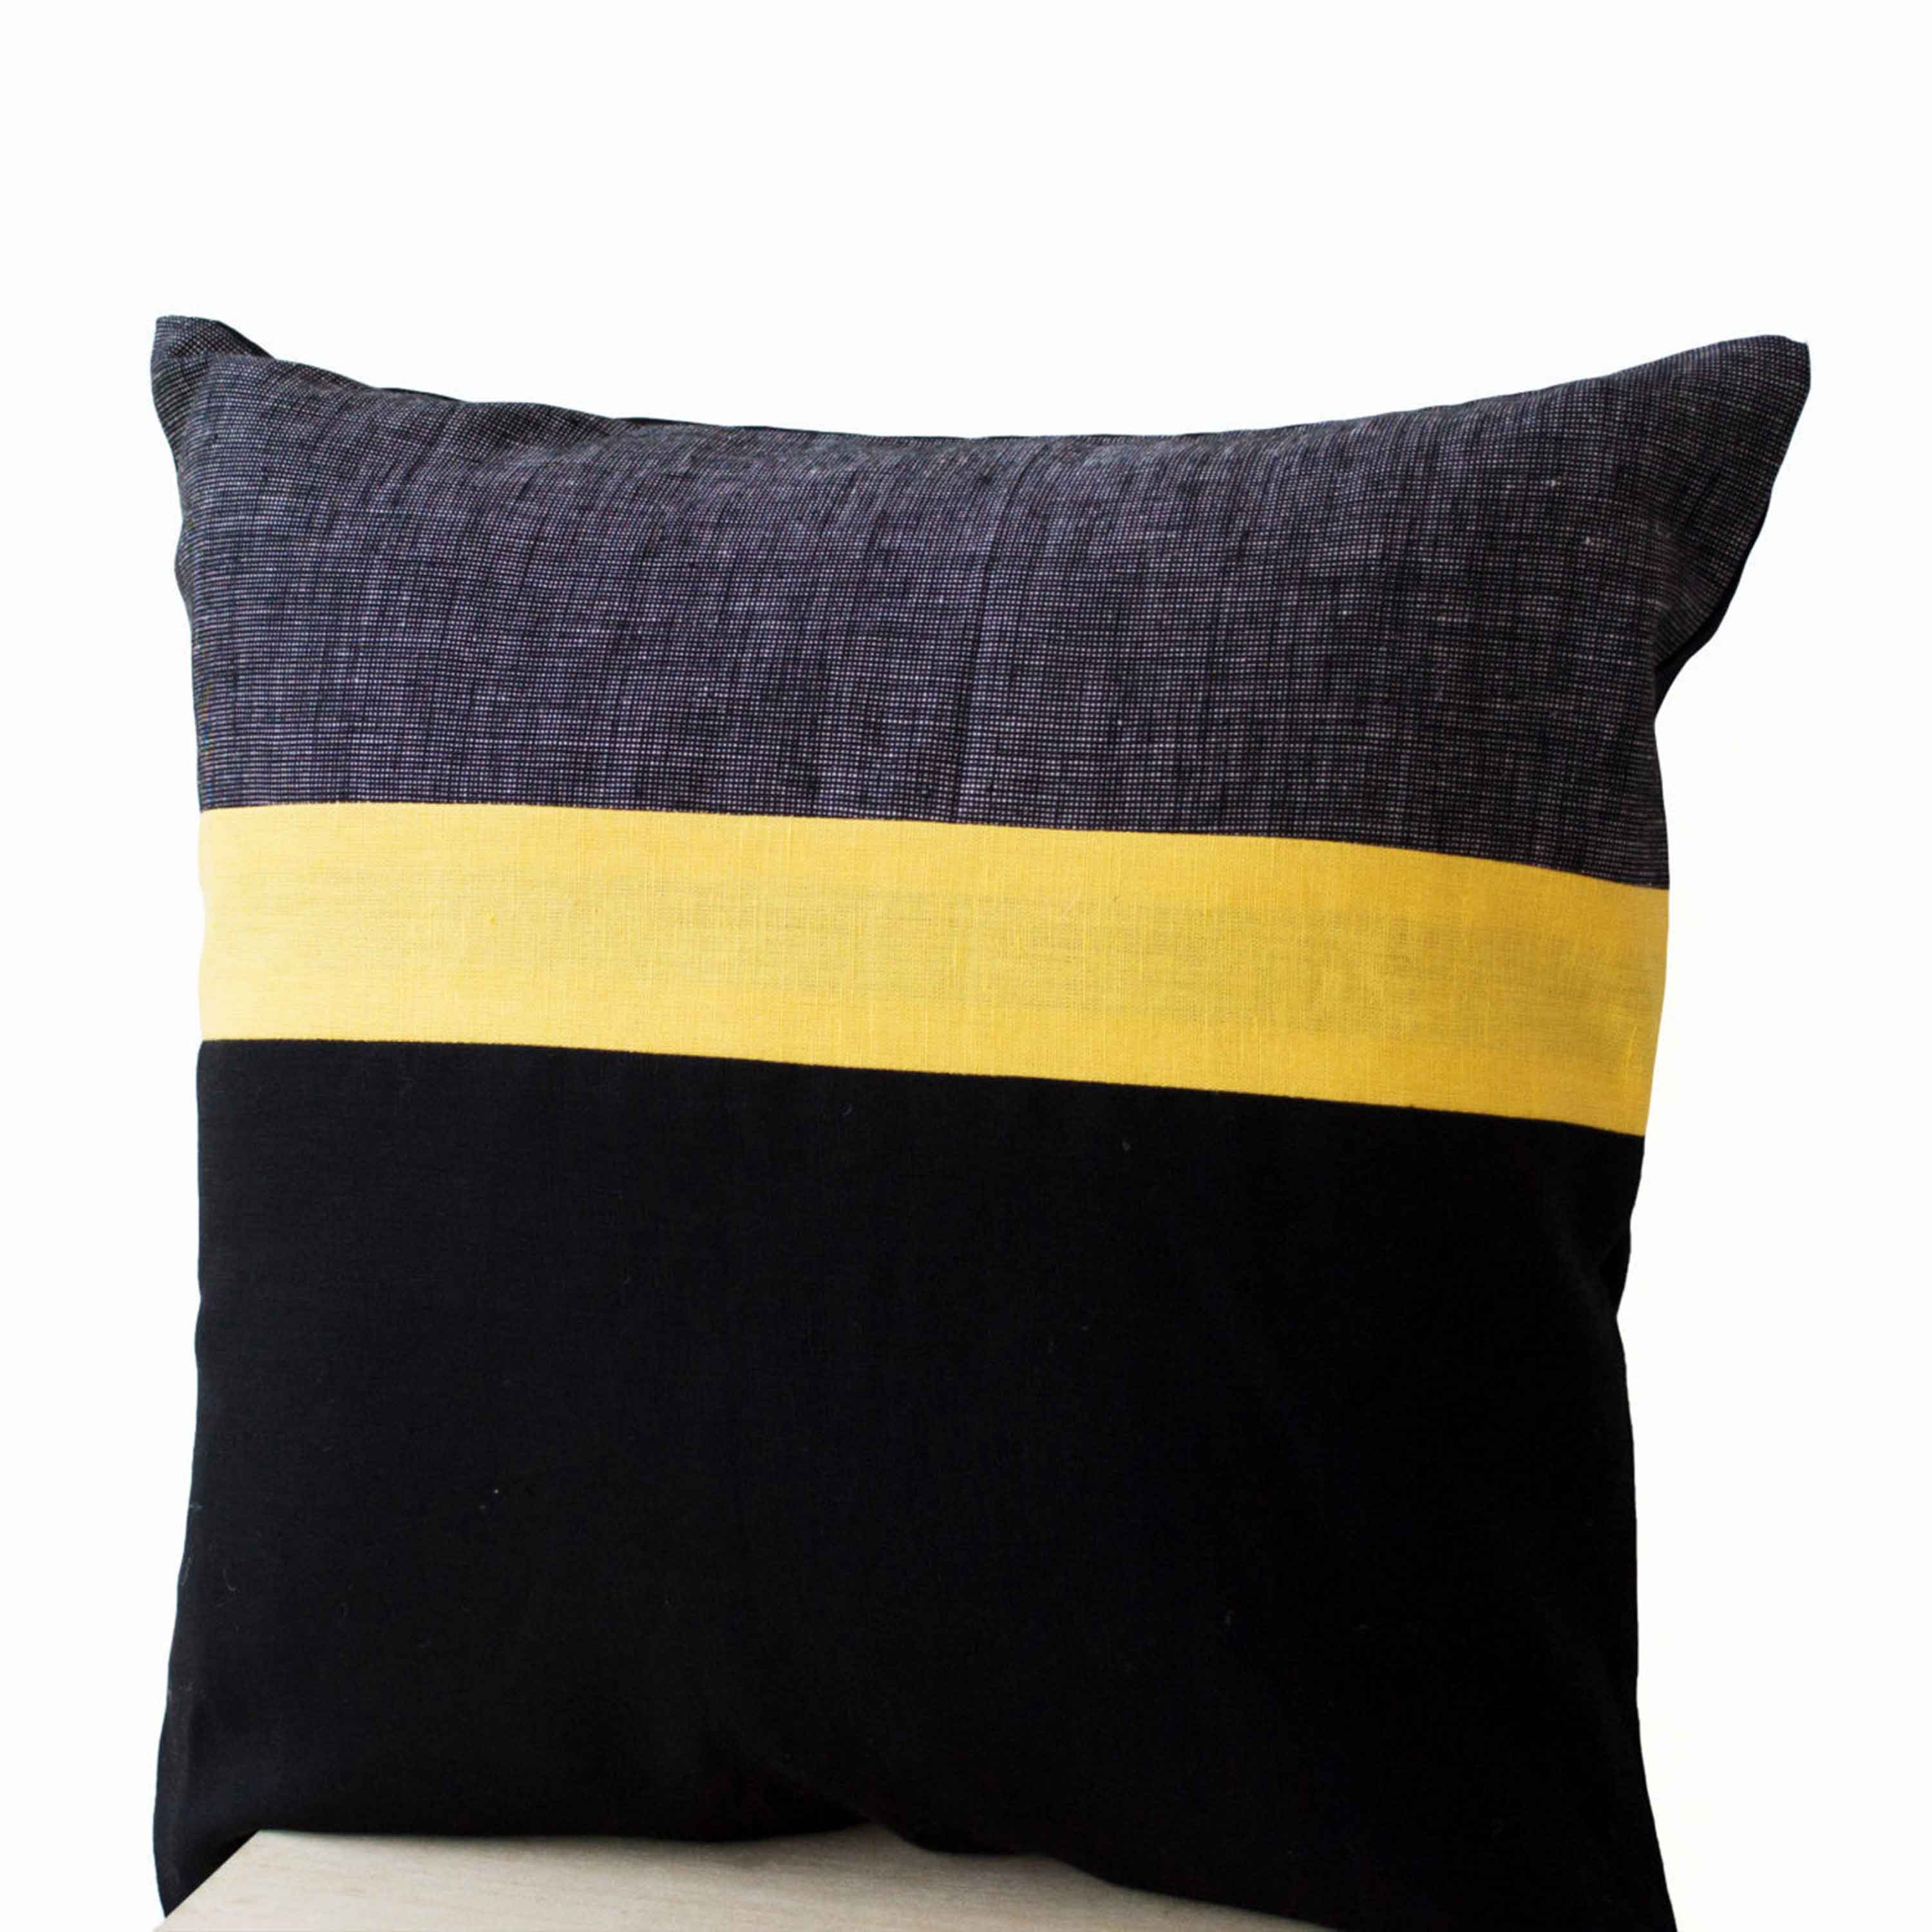 Premium Geometric Accent Linen Pillows Cover With Bold Stripes In Black, Grey And Yellow